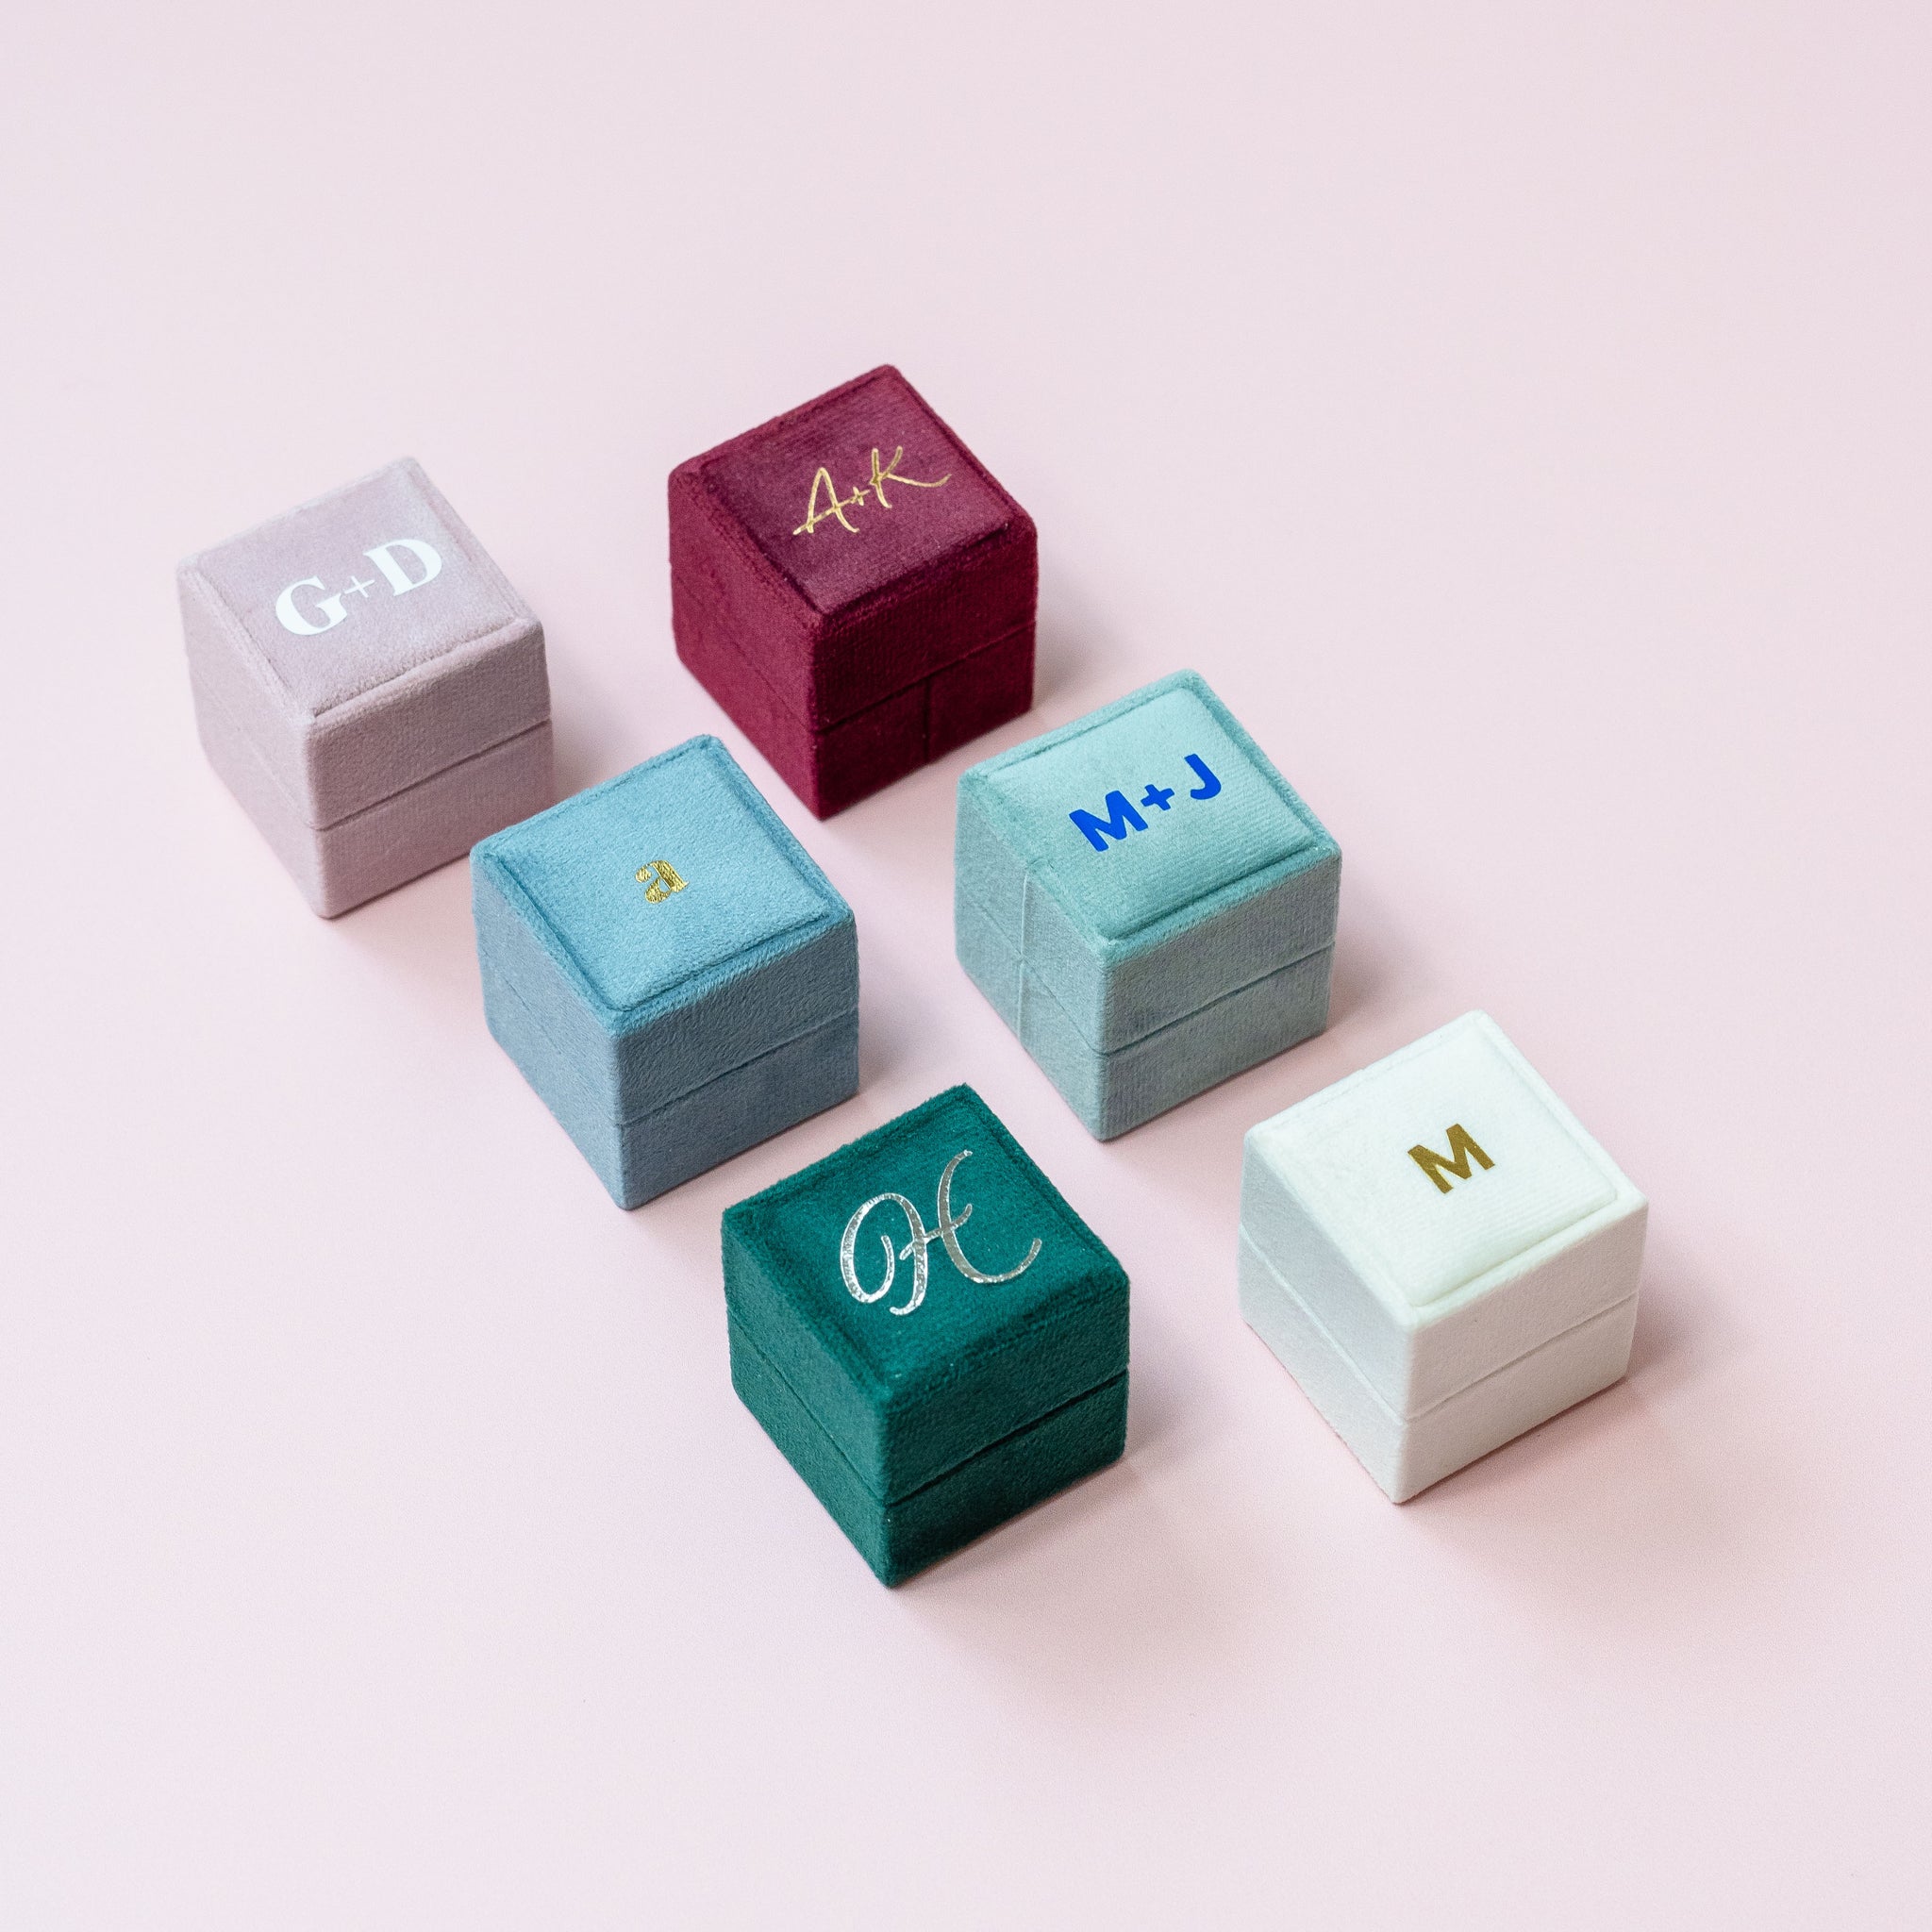 Velvet Ring Boxes with personalization by Birdy Grey